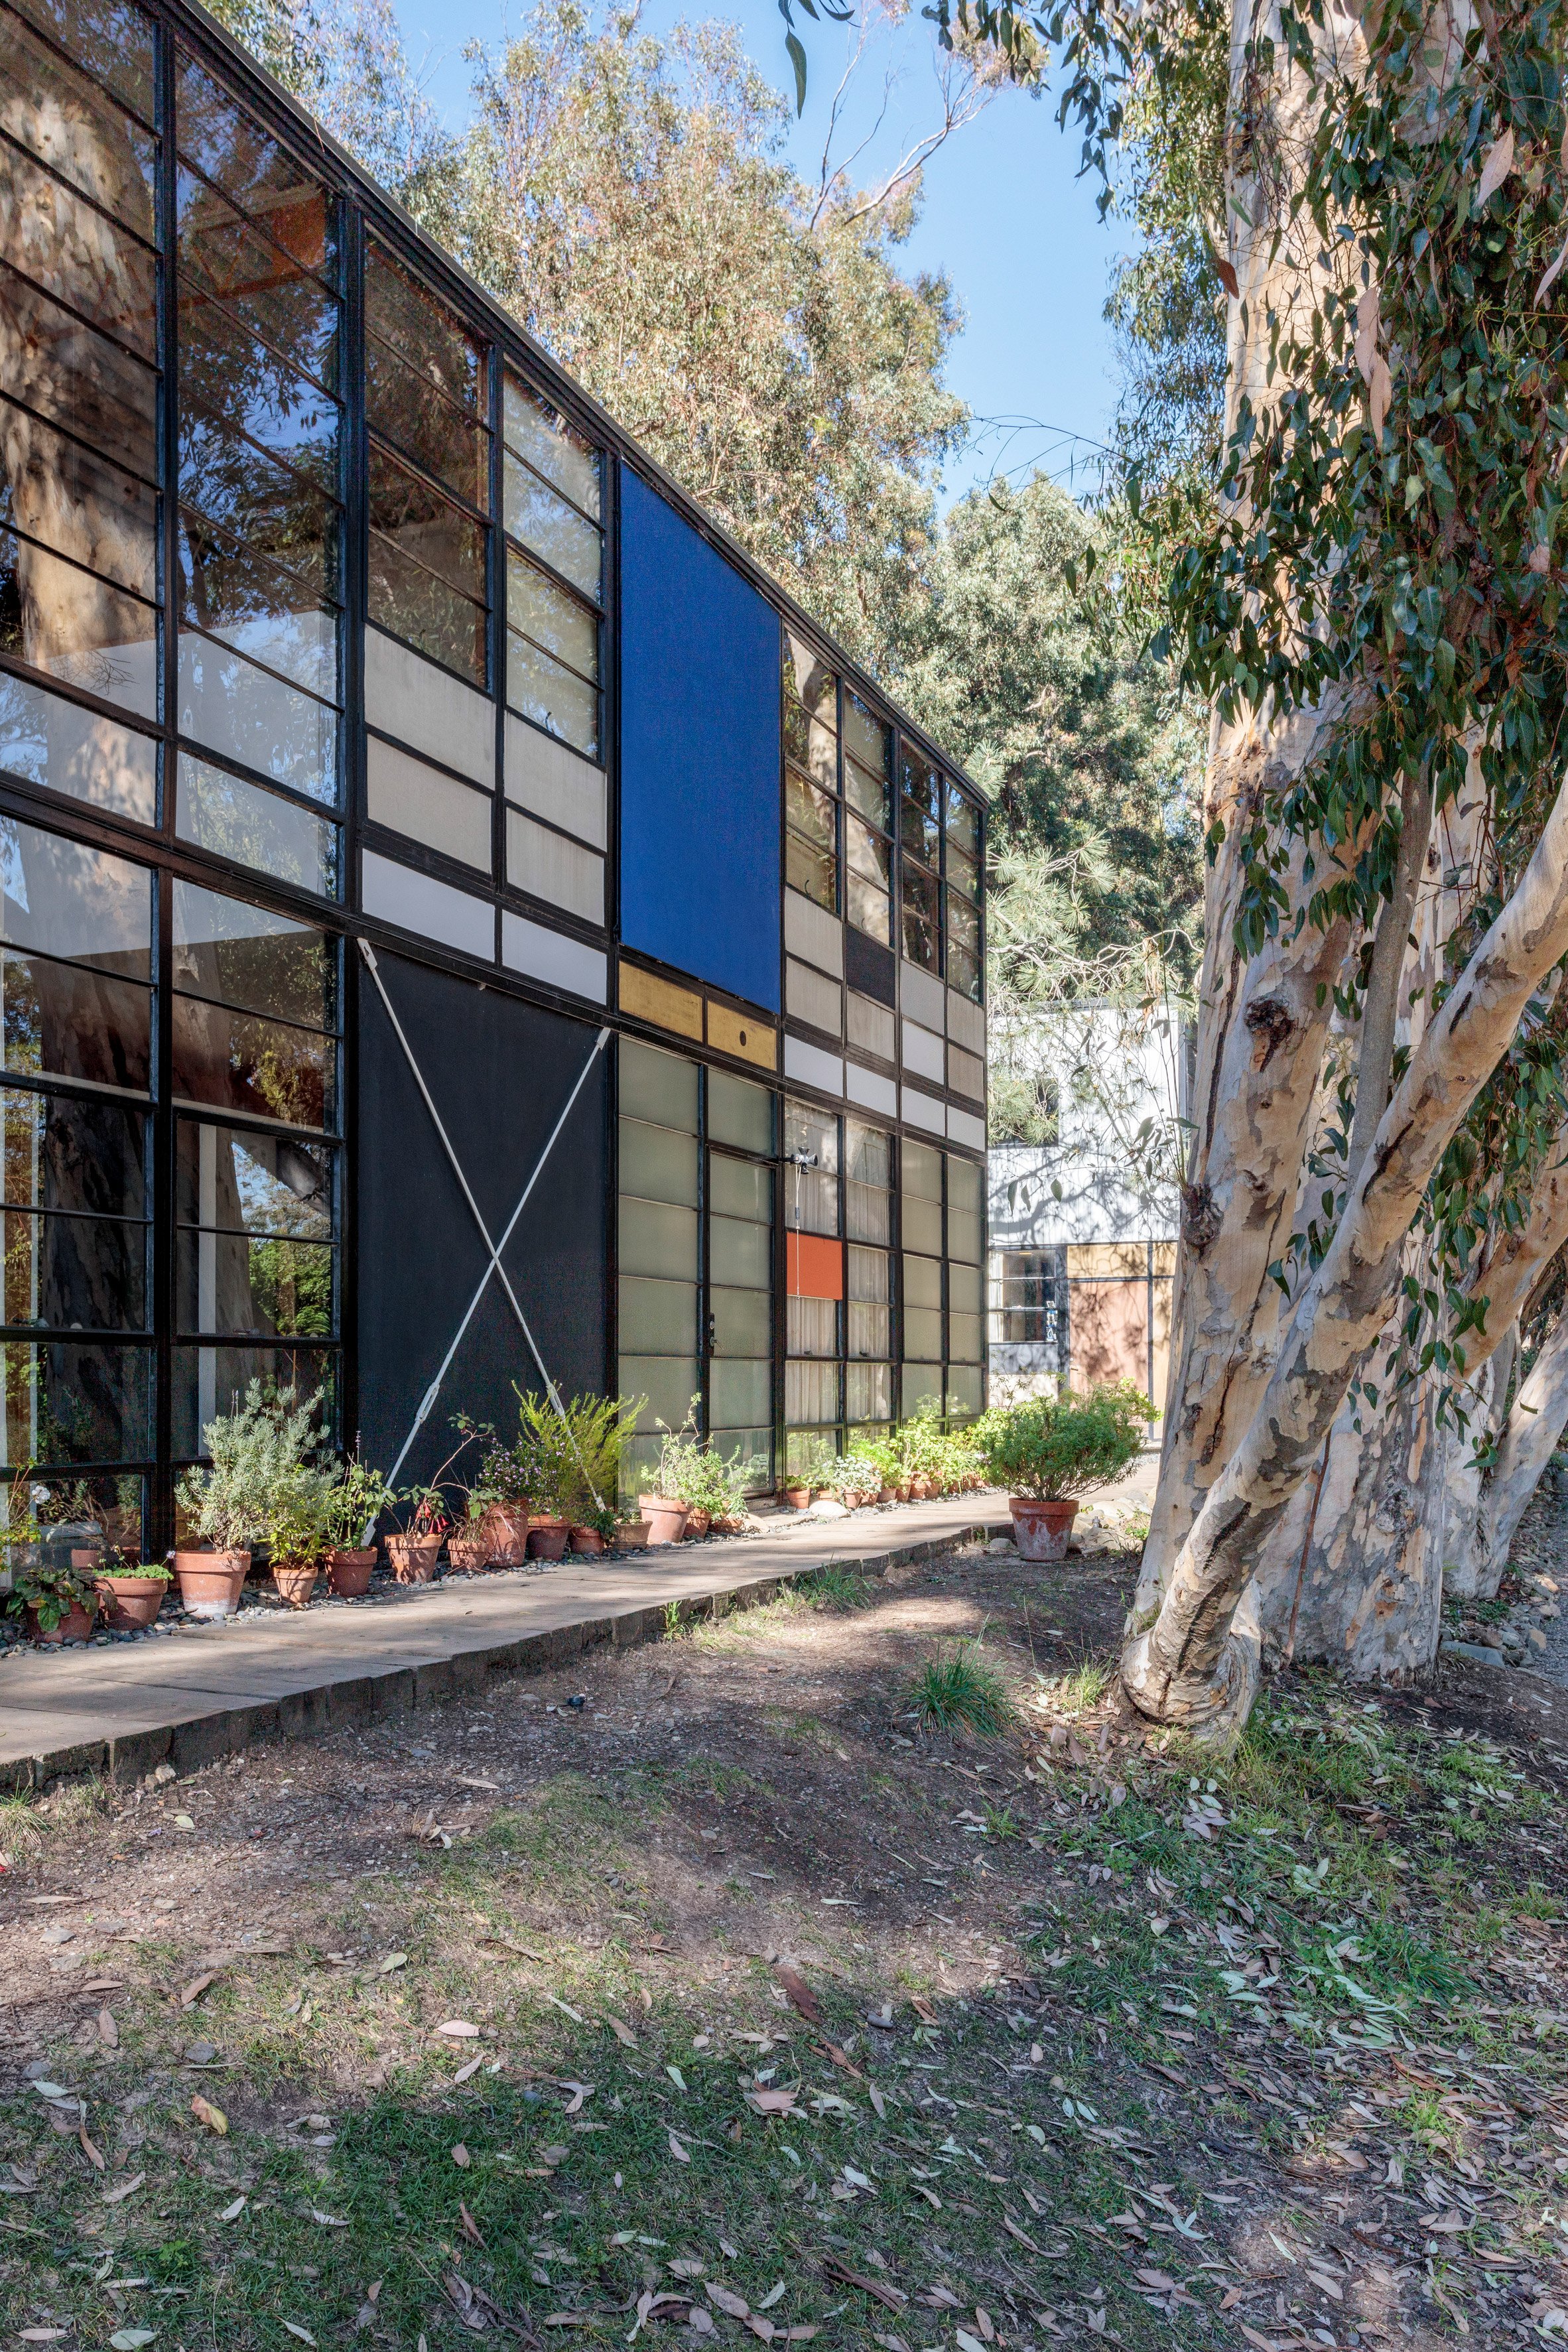 Eames House preservation plan launched to preserve 14-year-old home